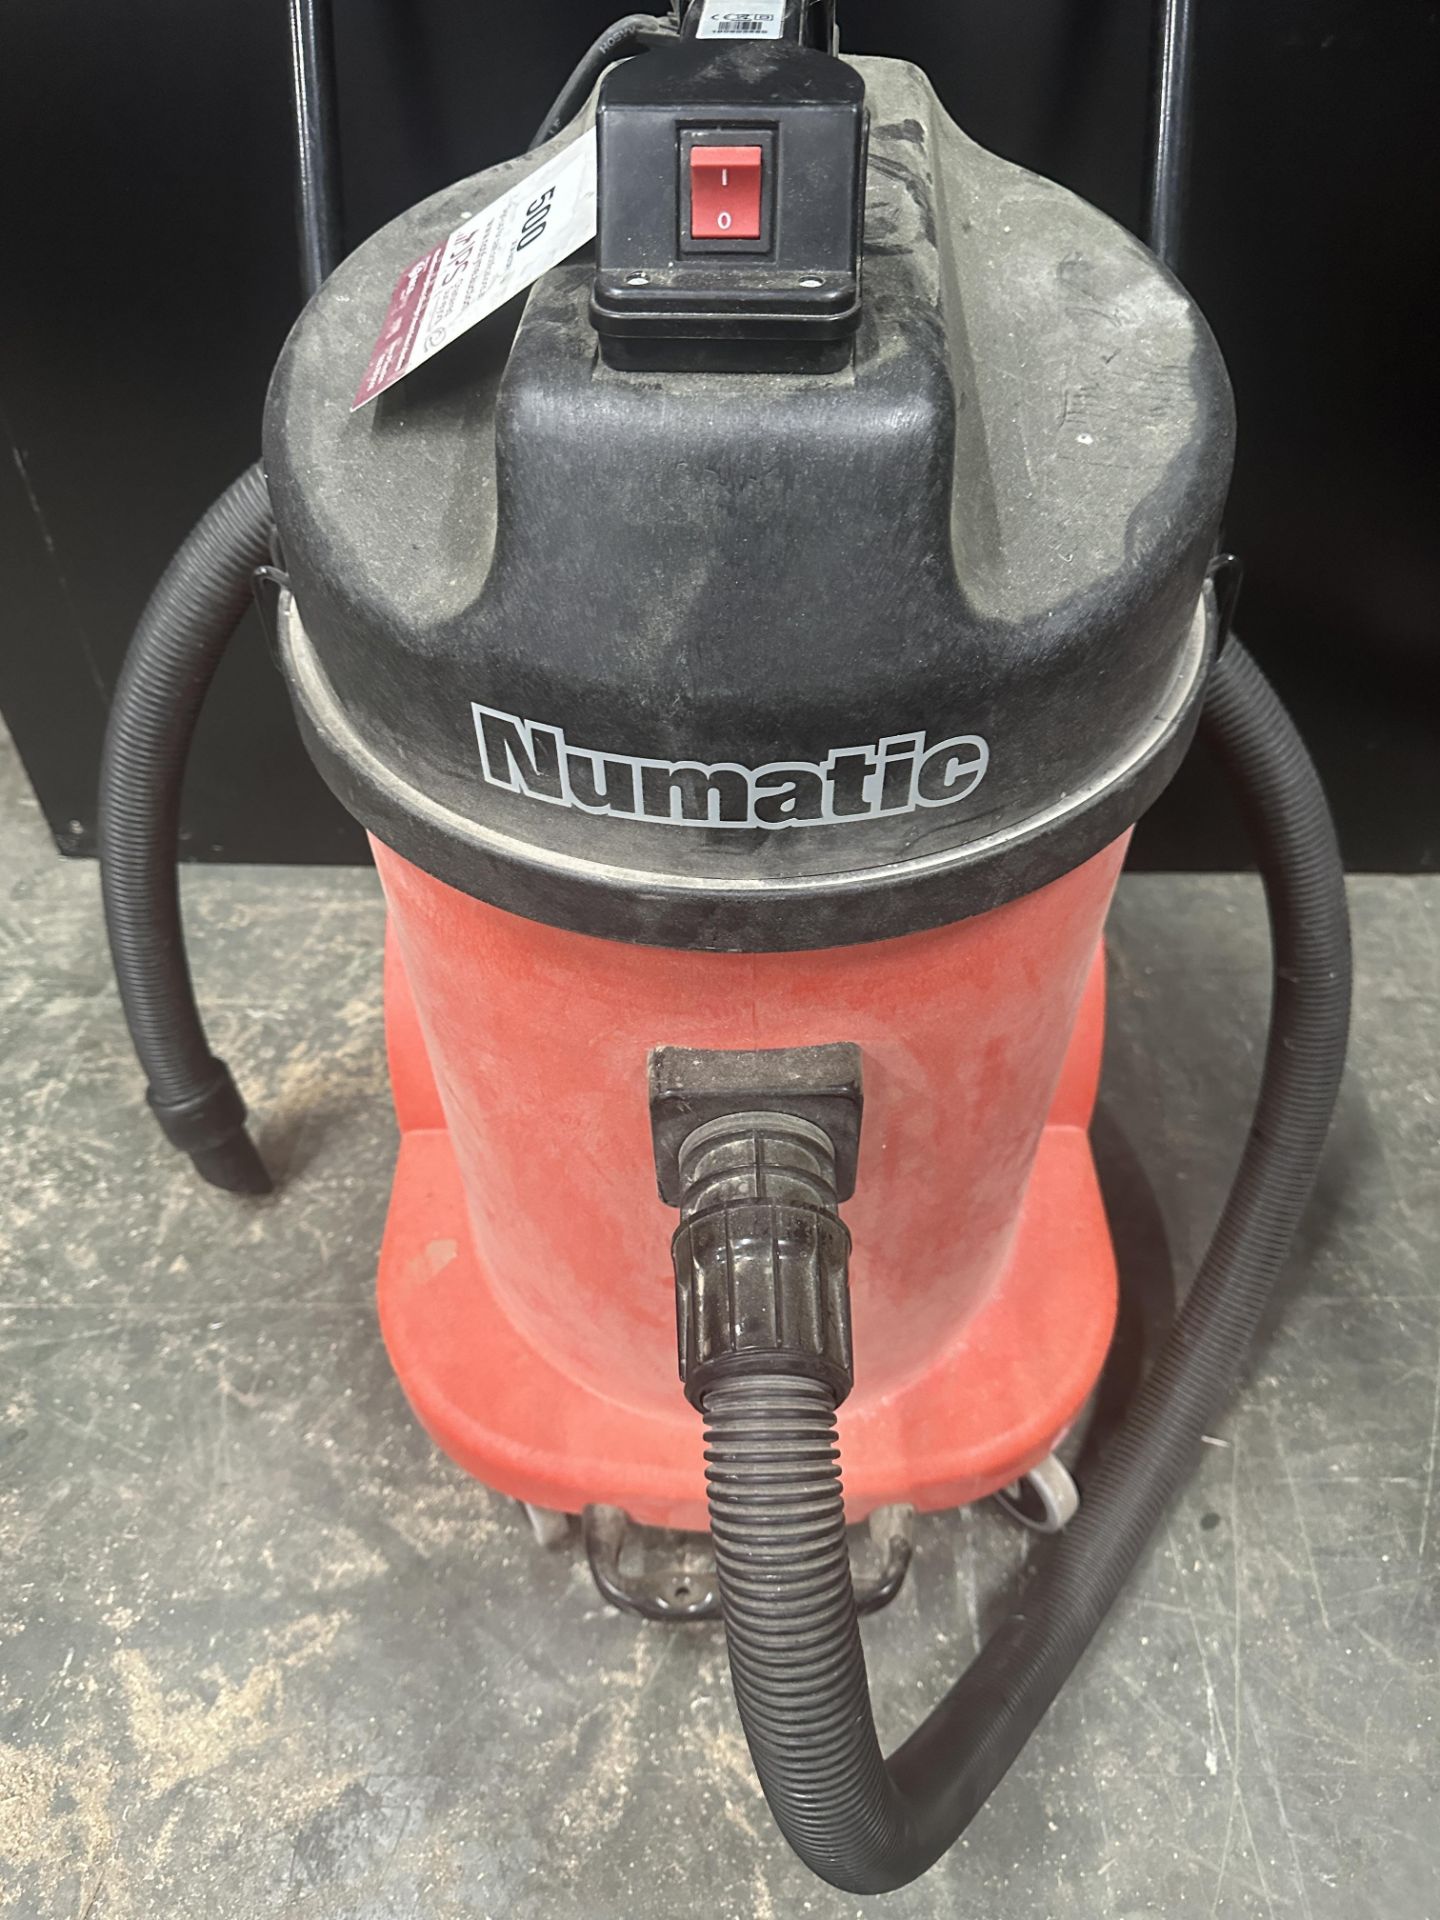 Numatic NVDG900-2 industrial dust extractor - Image 3 of 3